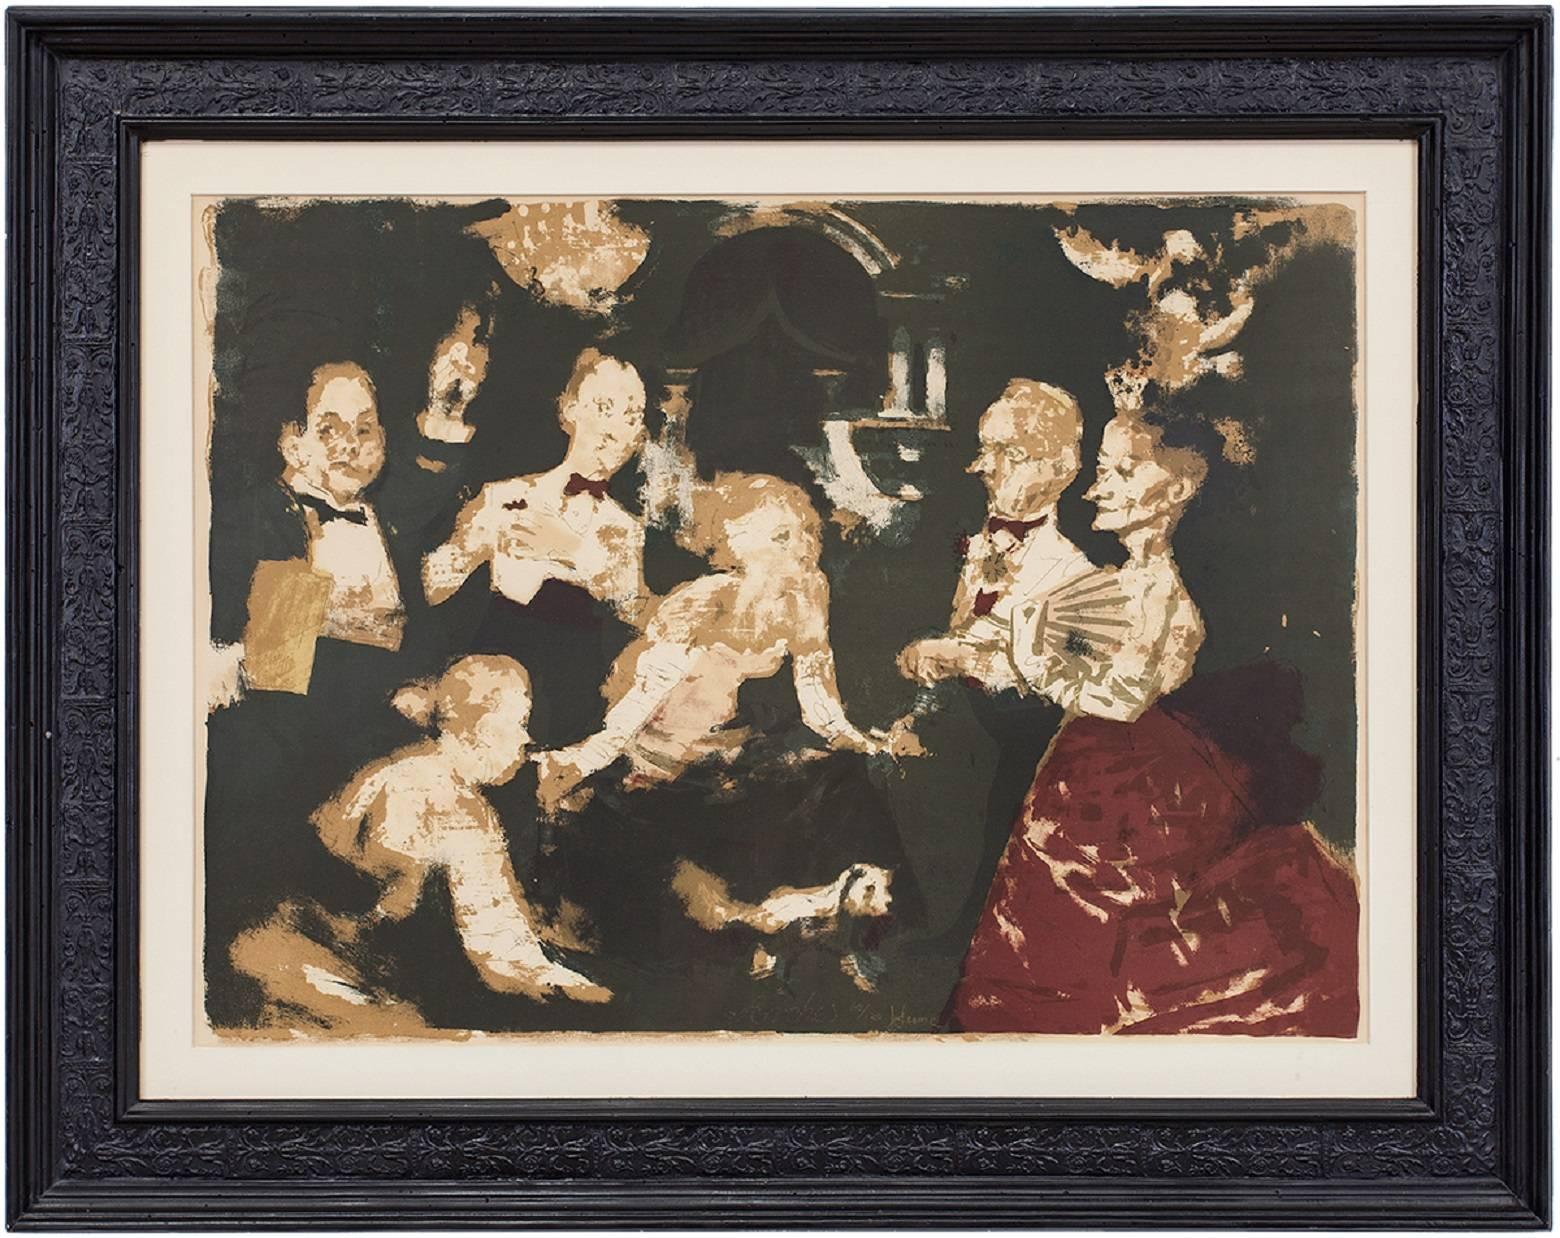 
This is being sold unframed. Reception in Miami.
Born to Lithuanian Jewish parents, Levine grew up in the South End of Boston, where he observed a street life composed of European immigrants and a prevalence of poverty and societal ills, subjects